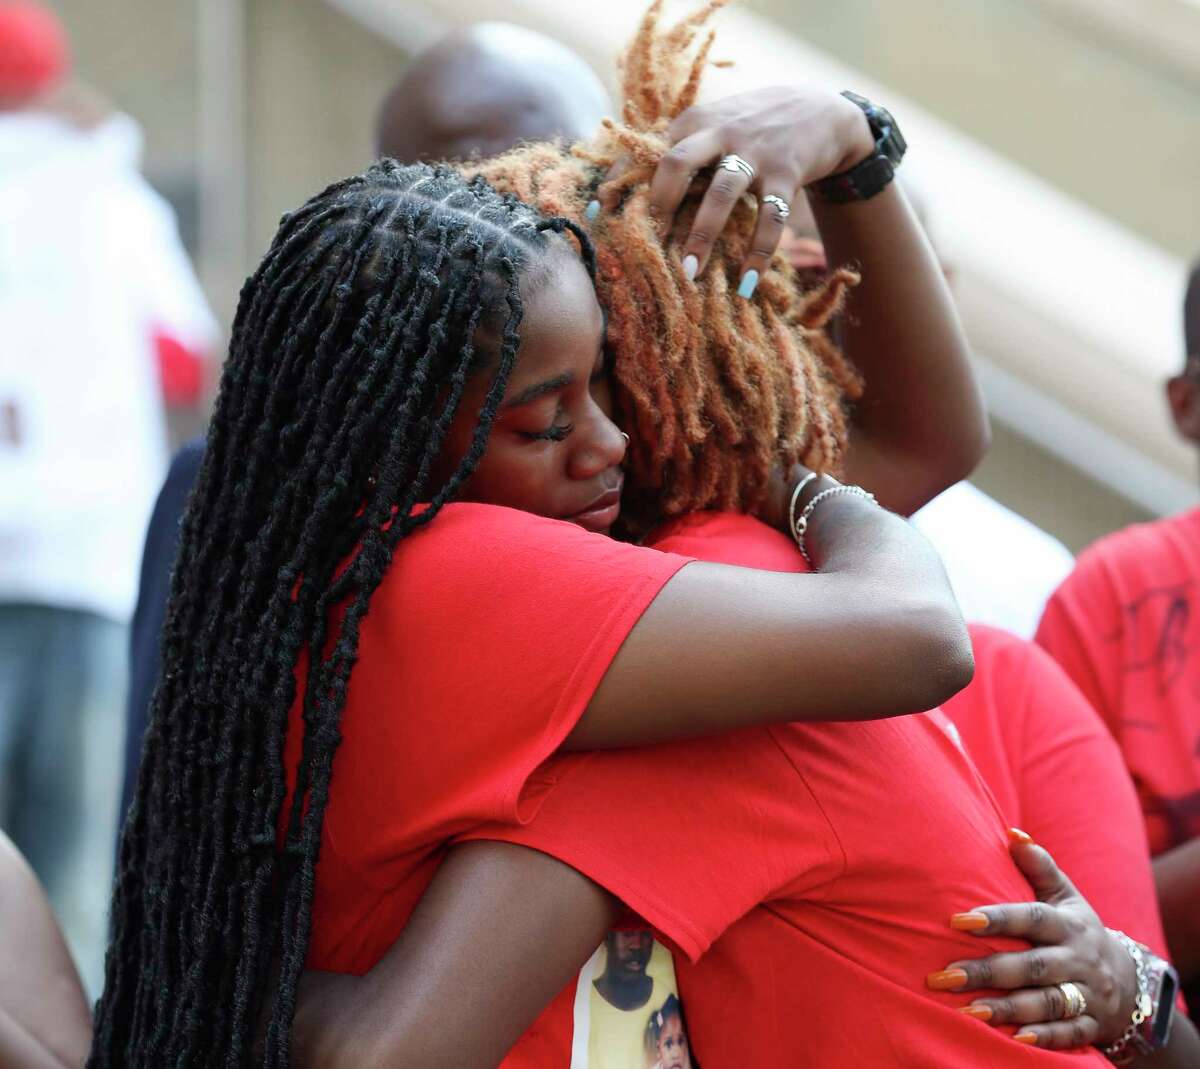 Aeenike Thomas, left, hugs her sister, Malikiya, after speaking about the death of their father, Danny Ray Thomas, during Rally for Justice to raise awareness of police violence in Houston and Harris County in front of the Harris County Civil Courthouse, Tuesday, Sept. 20, 2022, in Houston. Thomas, was shot and killed by a Harris County Sheriff's Office deputy in March of 2018.